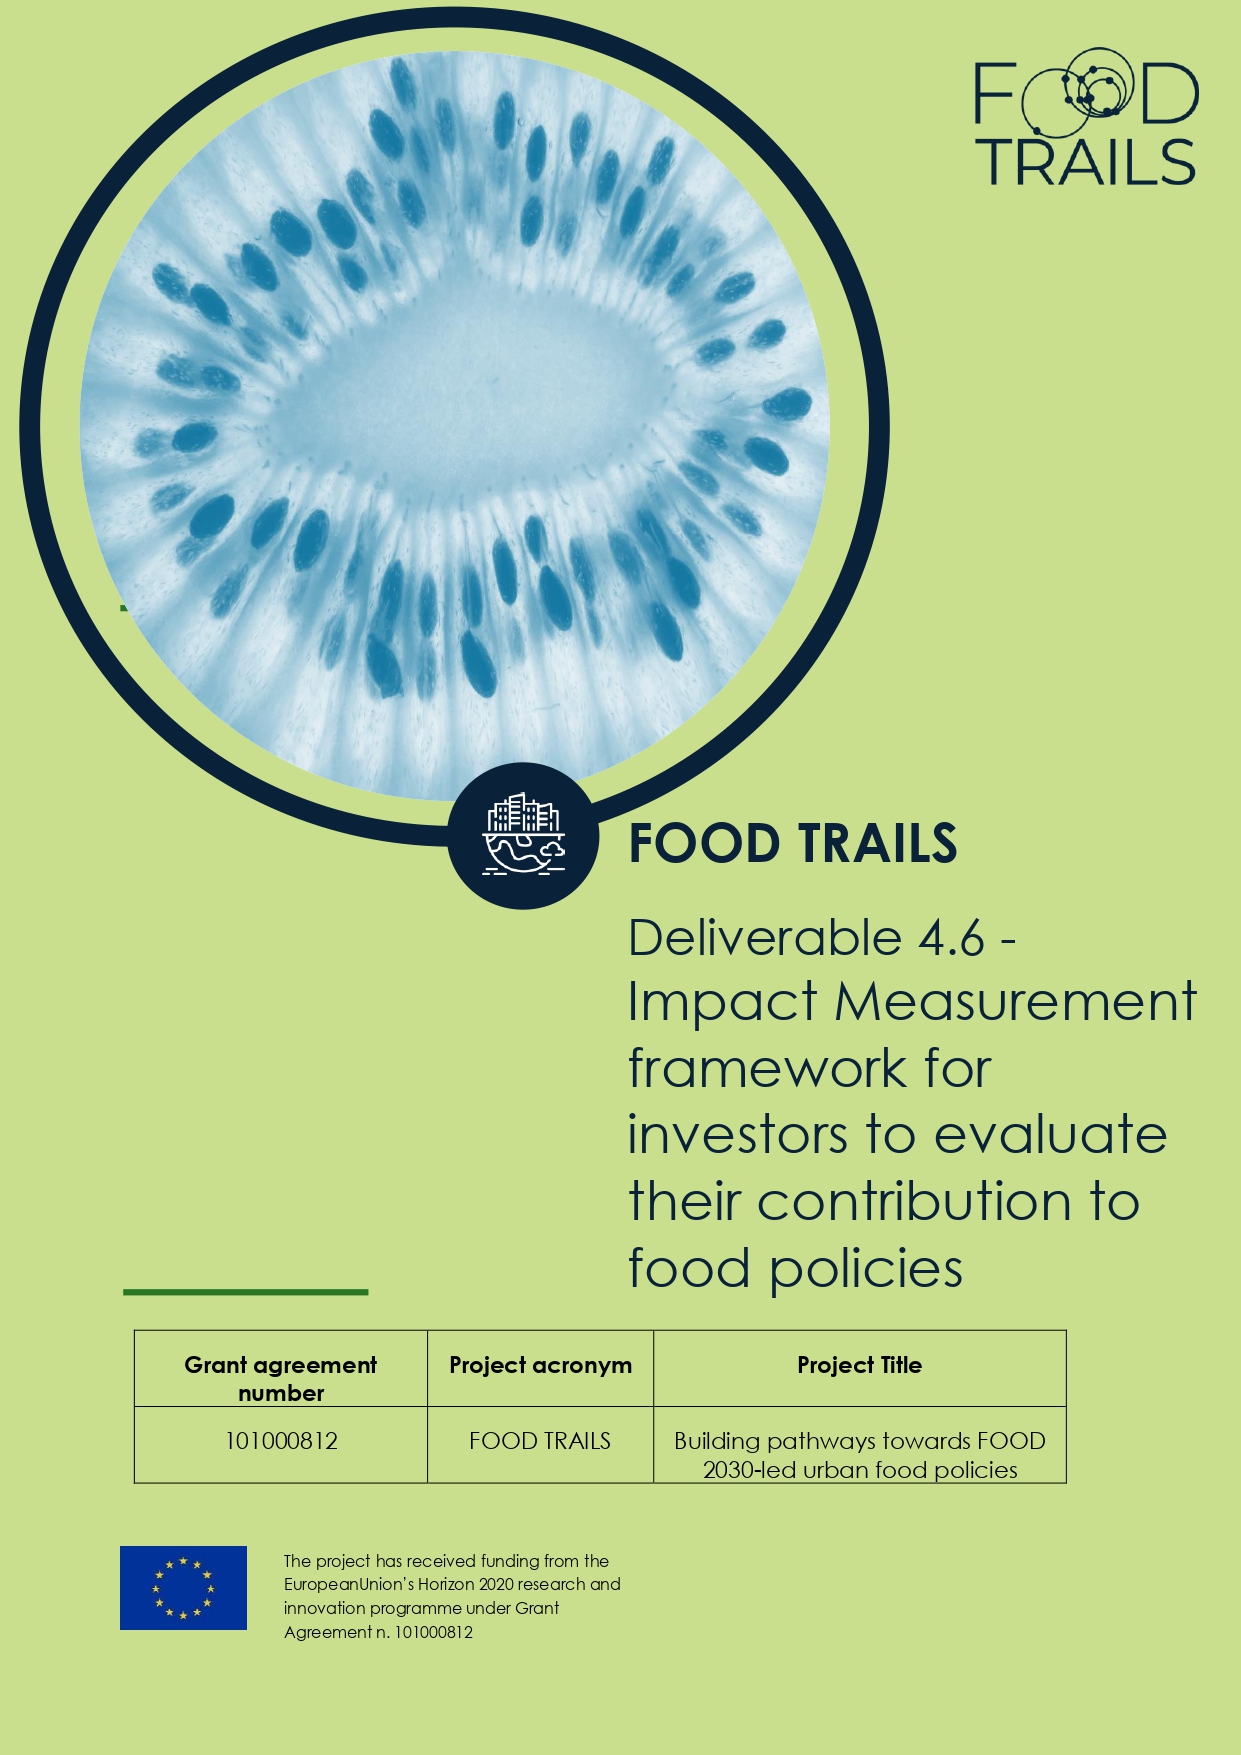 Impact measurement framework for investor to evaluate their contribution to food policies